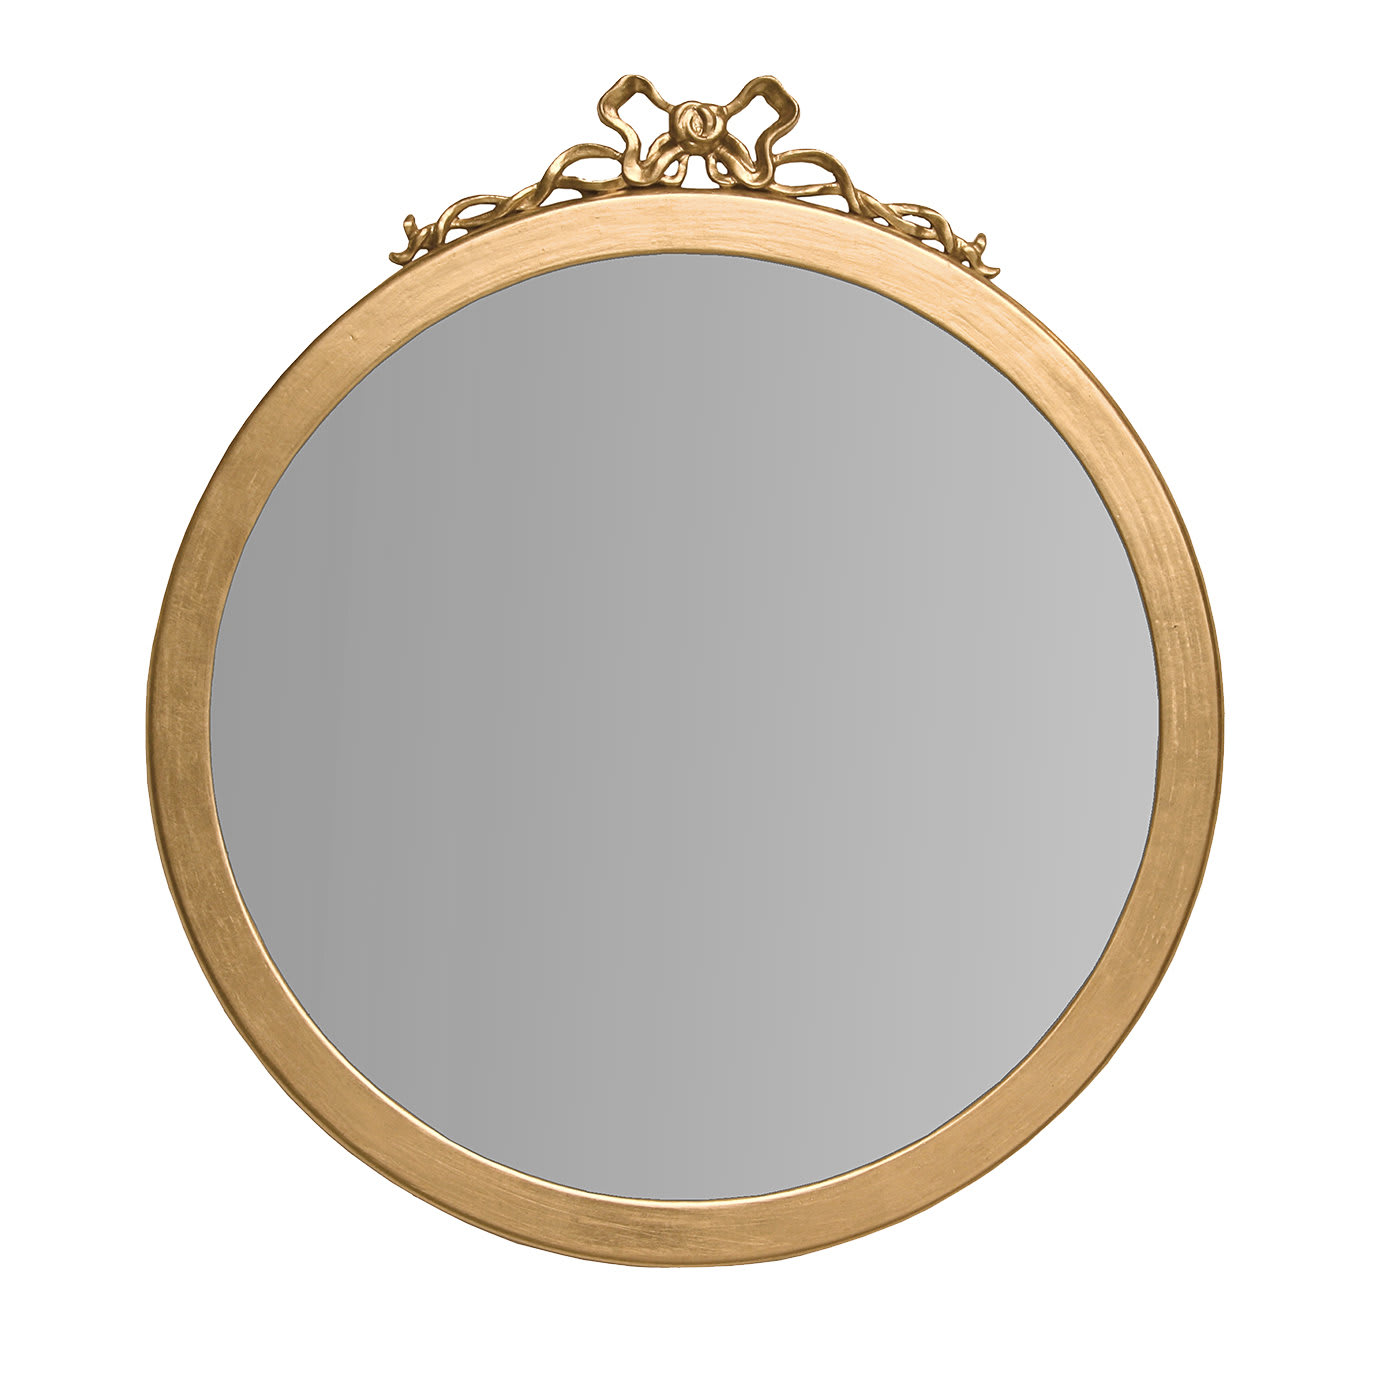 Round Mirror with Gold Leaf - Bianchini & Capponi